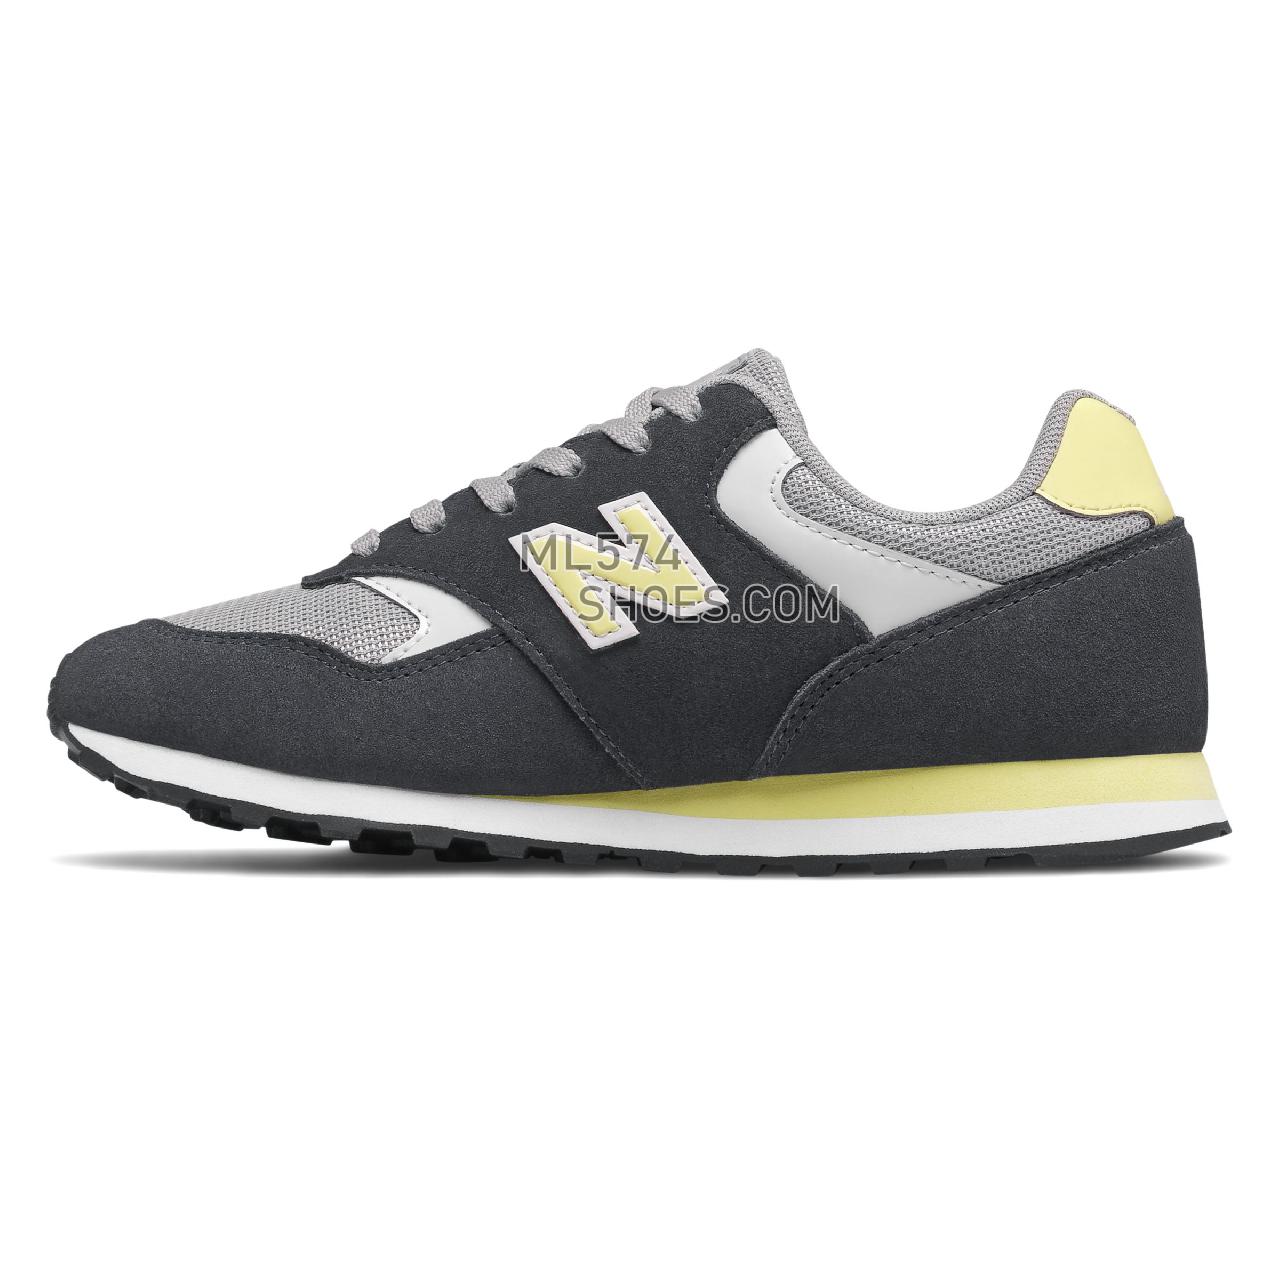 New Balance 393 - Women's Classic Sneakers - Outerspace with Lemon Haze - WL393VS1